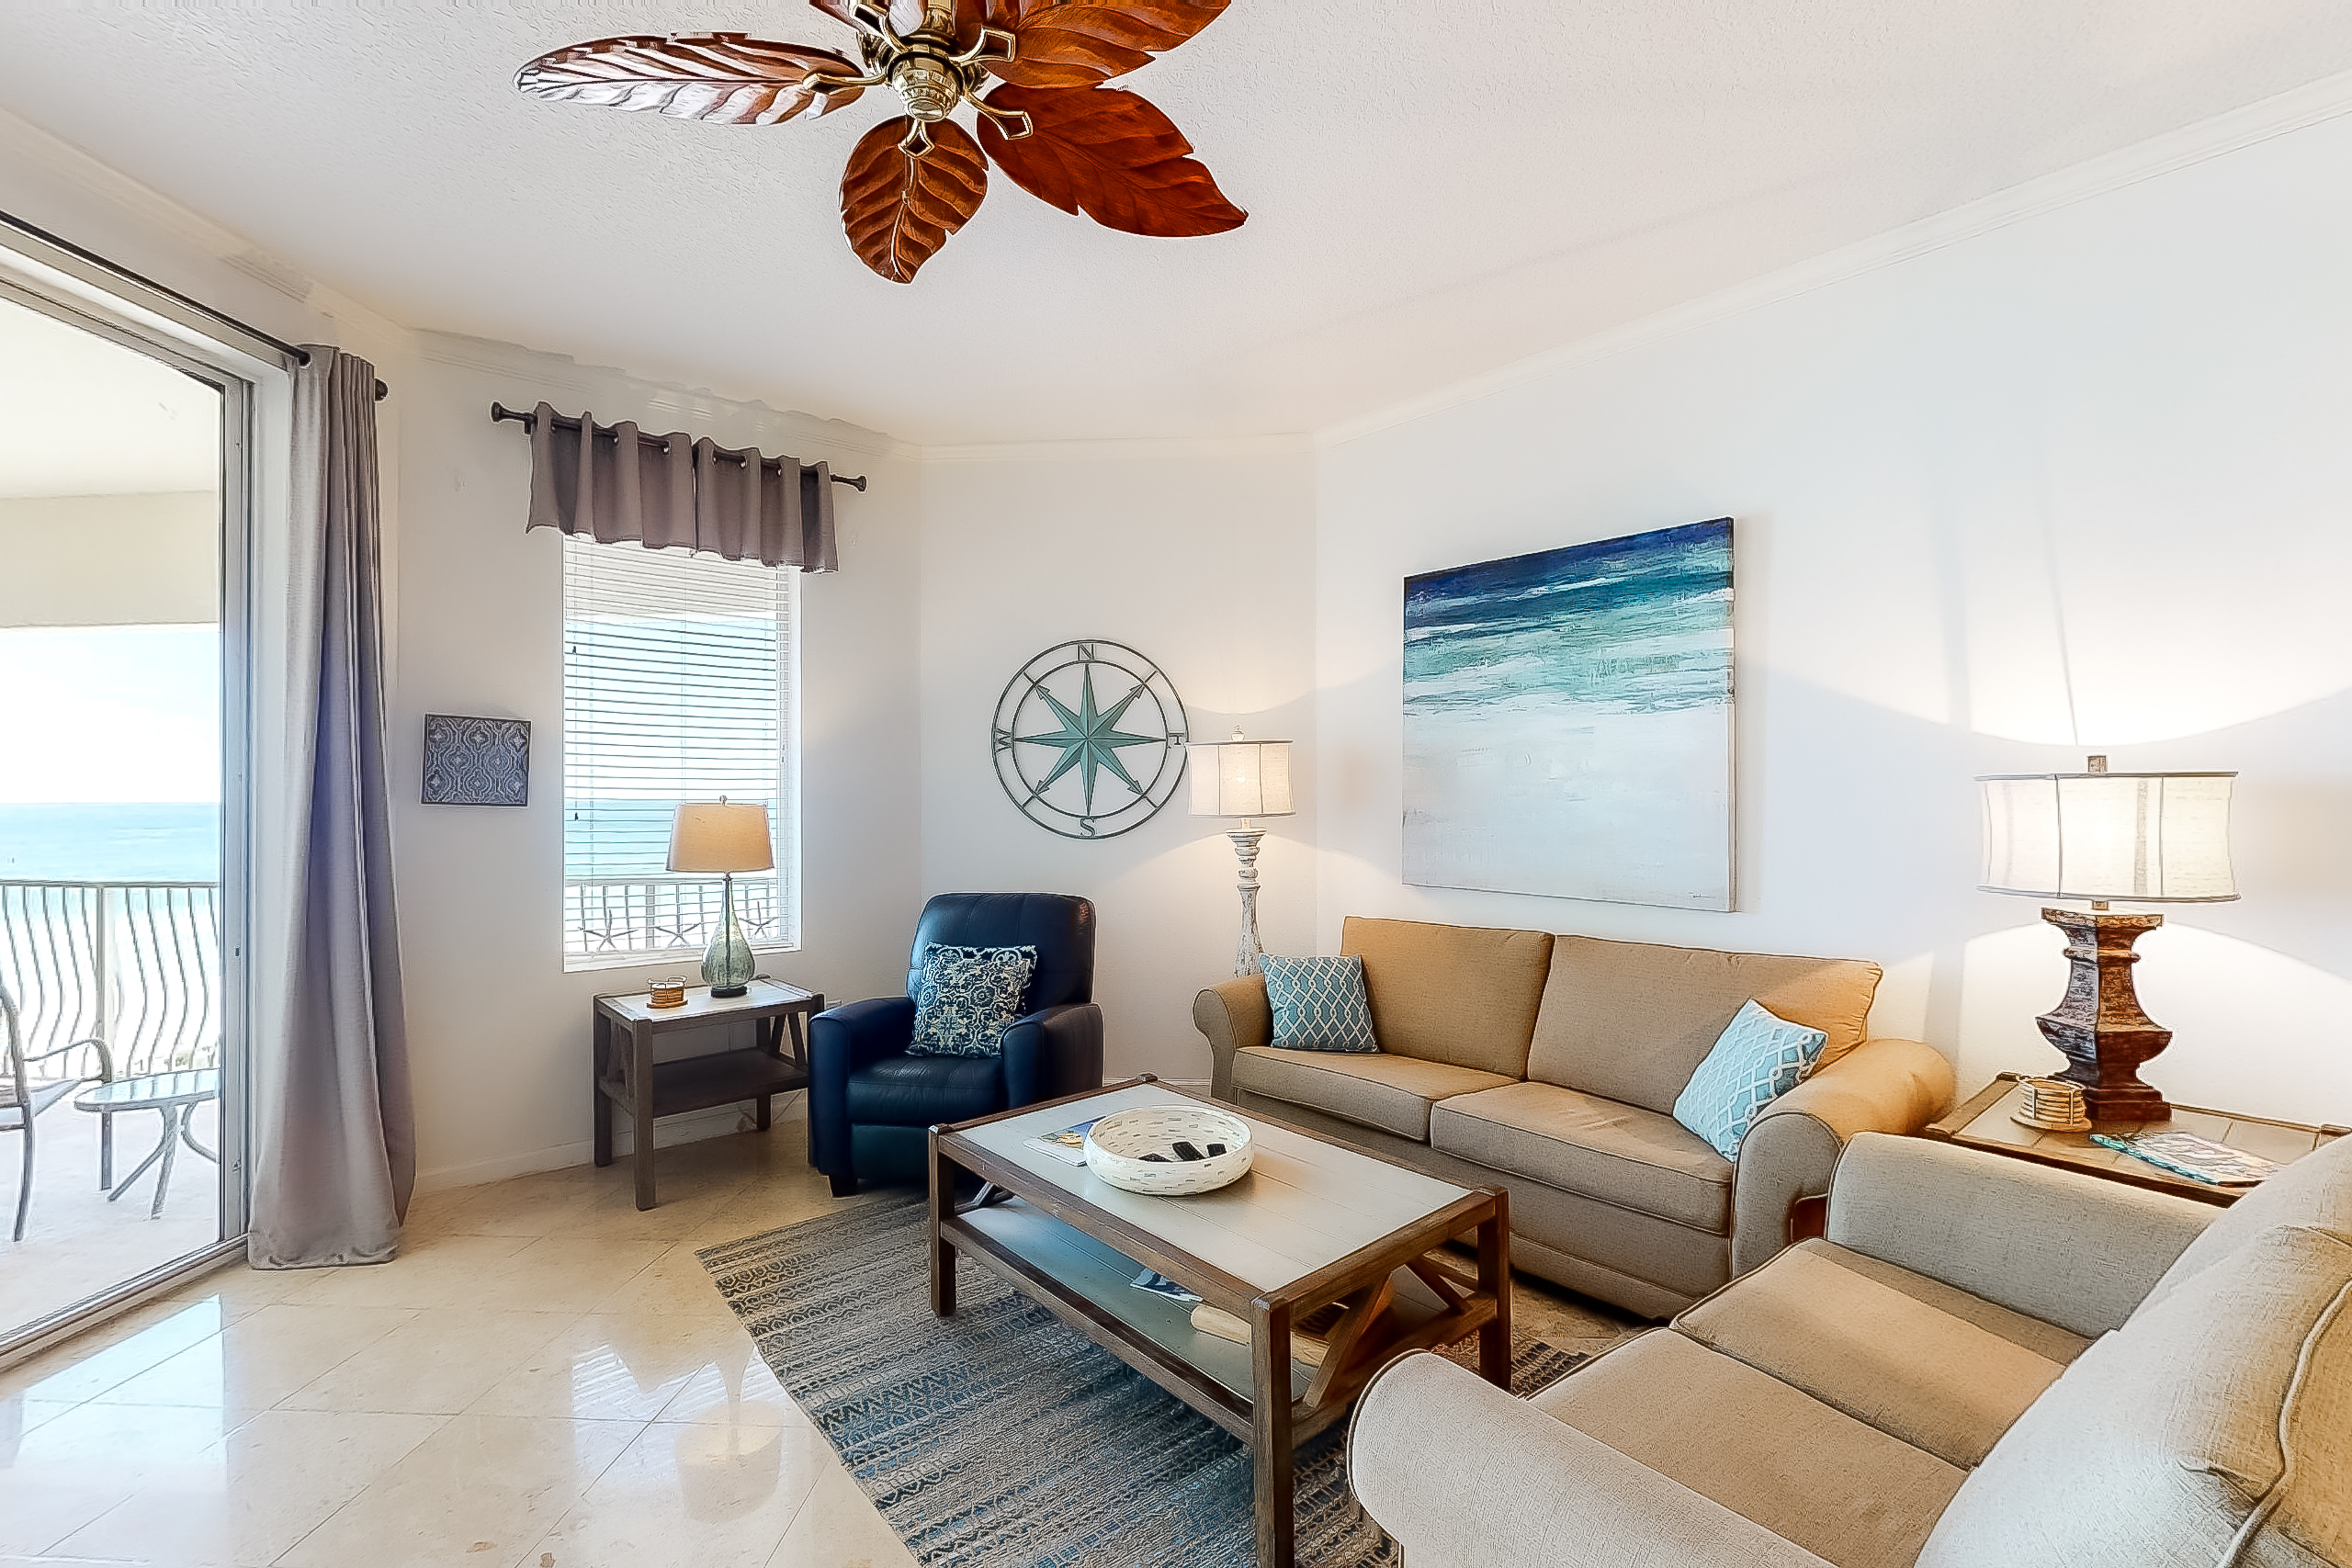 Dunes of Seagrove A408 Condo rental in Dunes of Seagrove in Highway 30-A Florida - #1